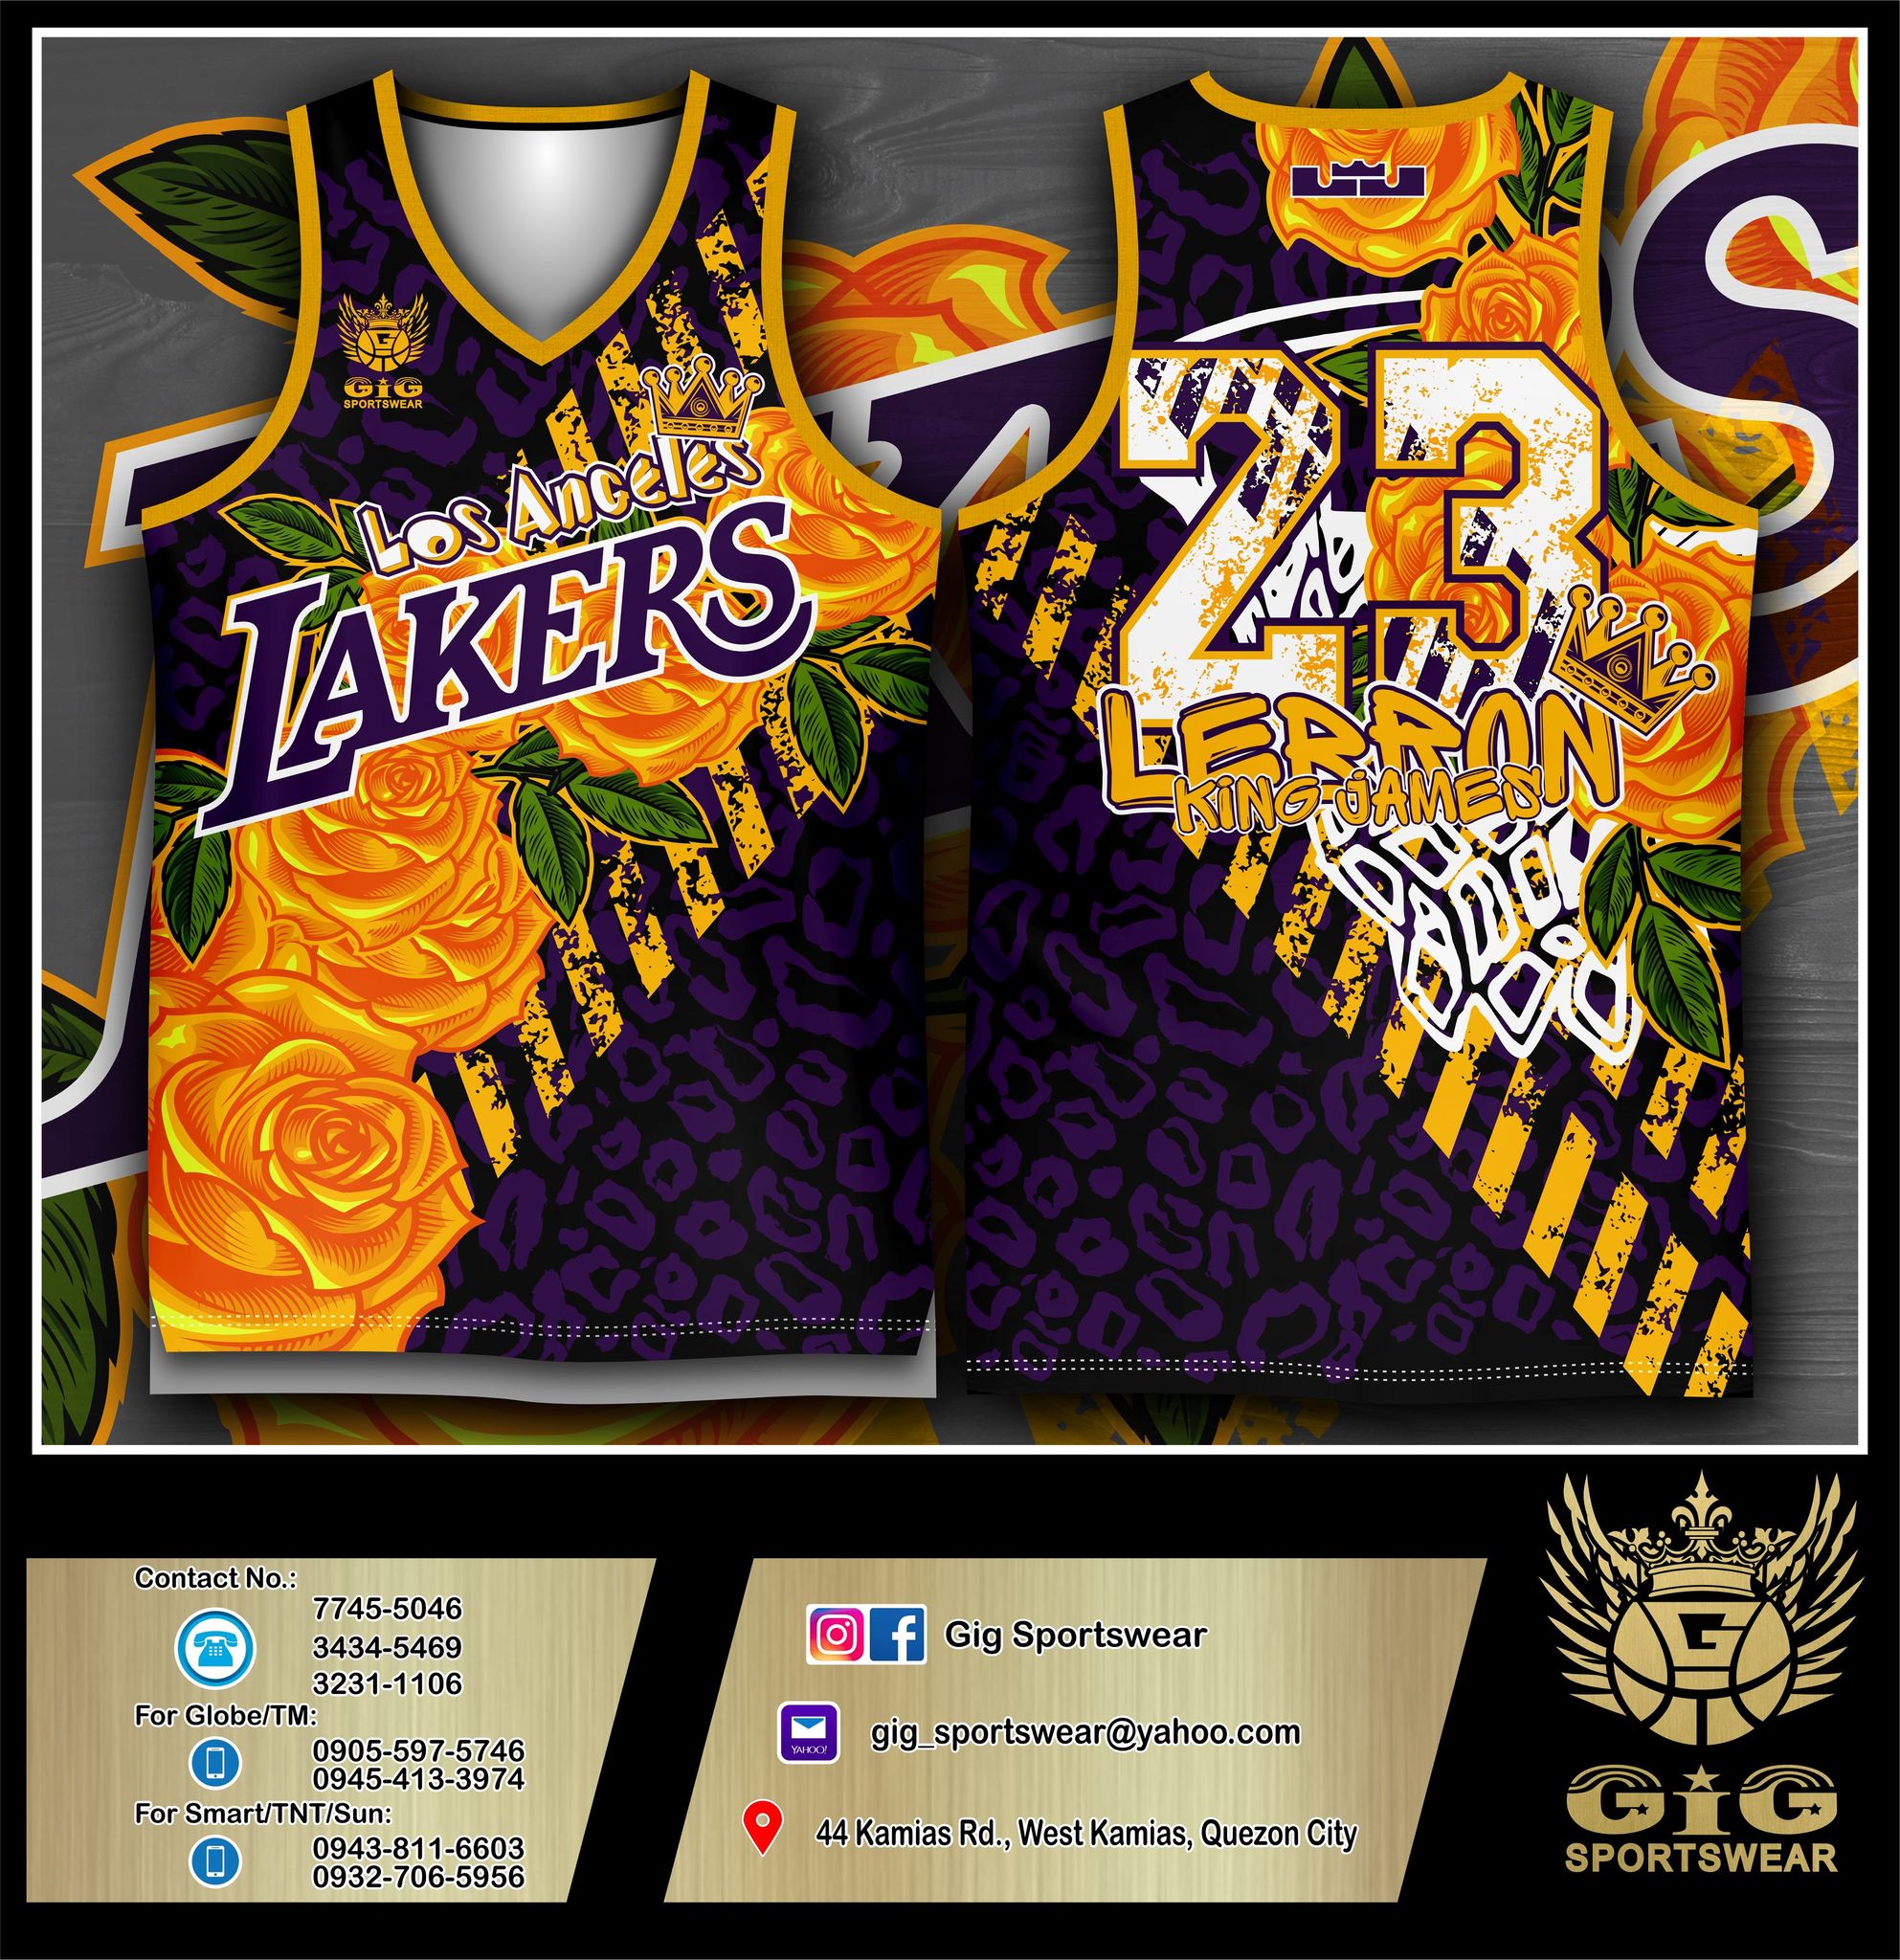 GIG SPORTSWEAR on Twitter: "New designs of LA Lakers jerseys are out! Get  yours for only P650! COD available nationwide. #lakers #sports #Jersey4sale  #Jersey #LeBronJames https://t.co/IzuCLXUAPl" / X